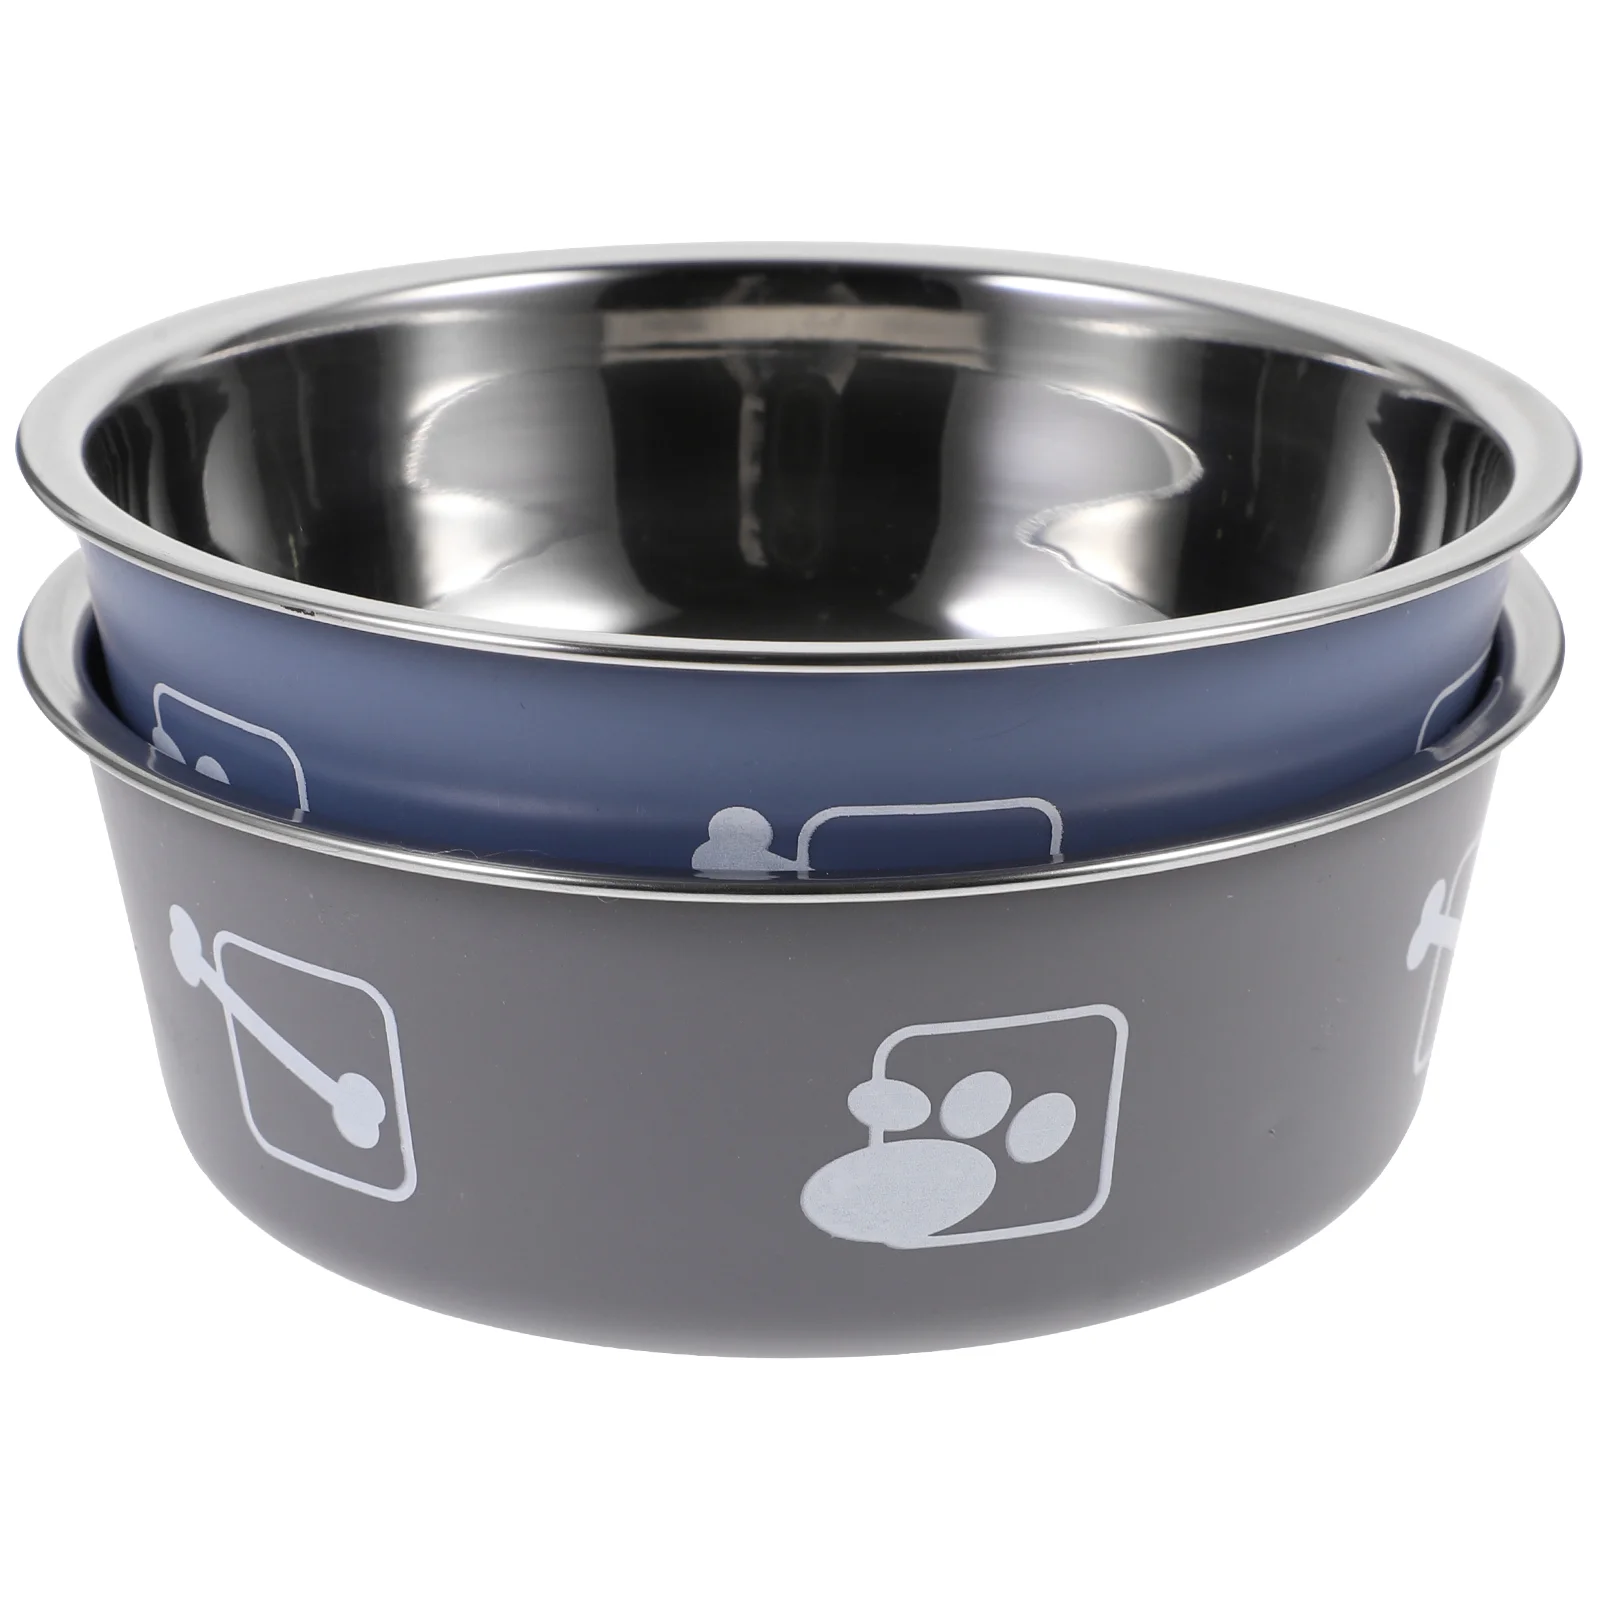 

Dog Bowl Pet Bowls Cat Feeding Feeder Stainless Water Puppy Skid Container Dispenser Holder Practical Non Anti Dishes Base Steel